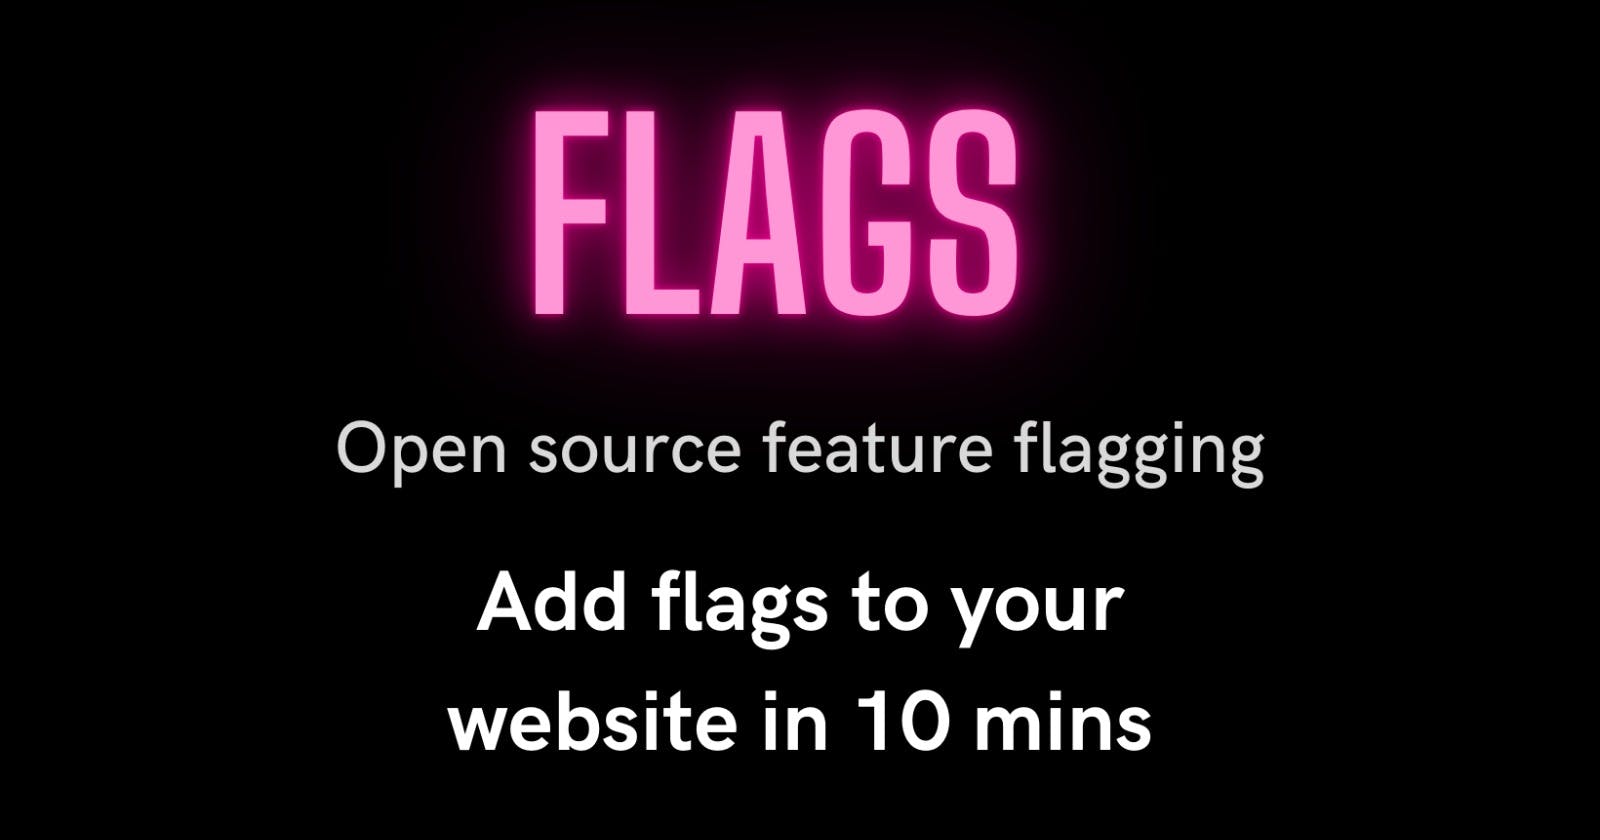 Flags: Open source feature flag management software